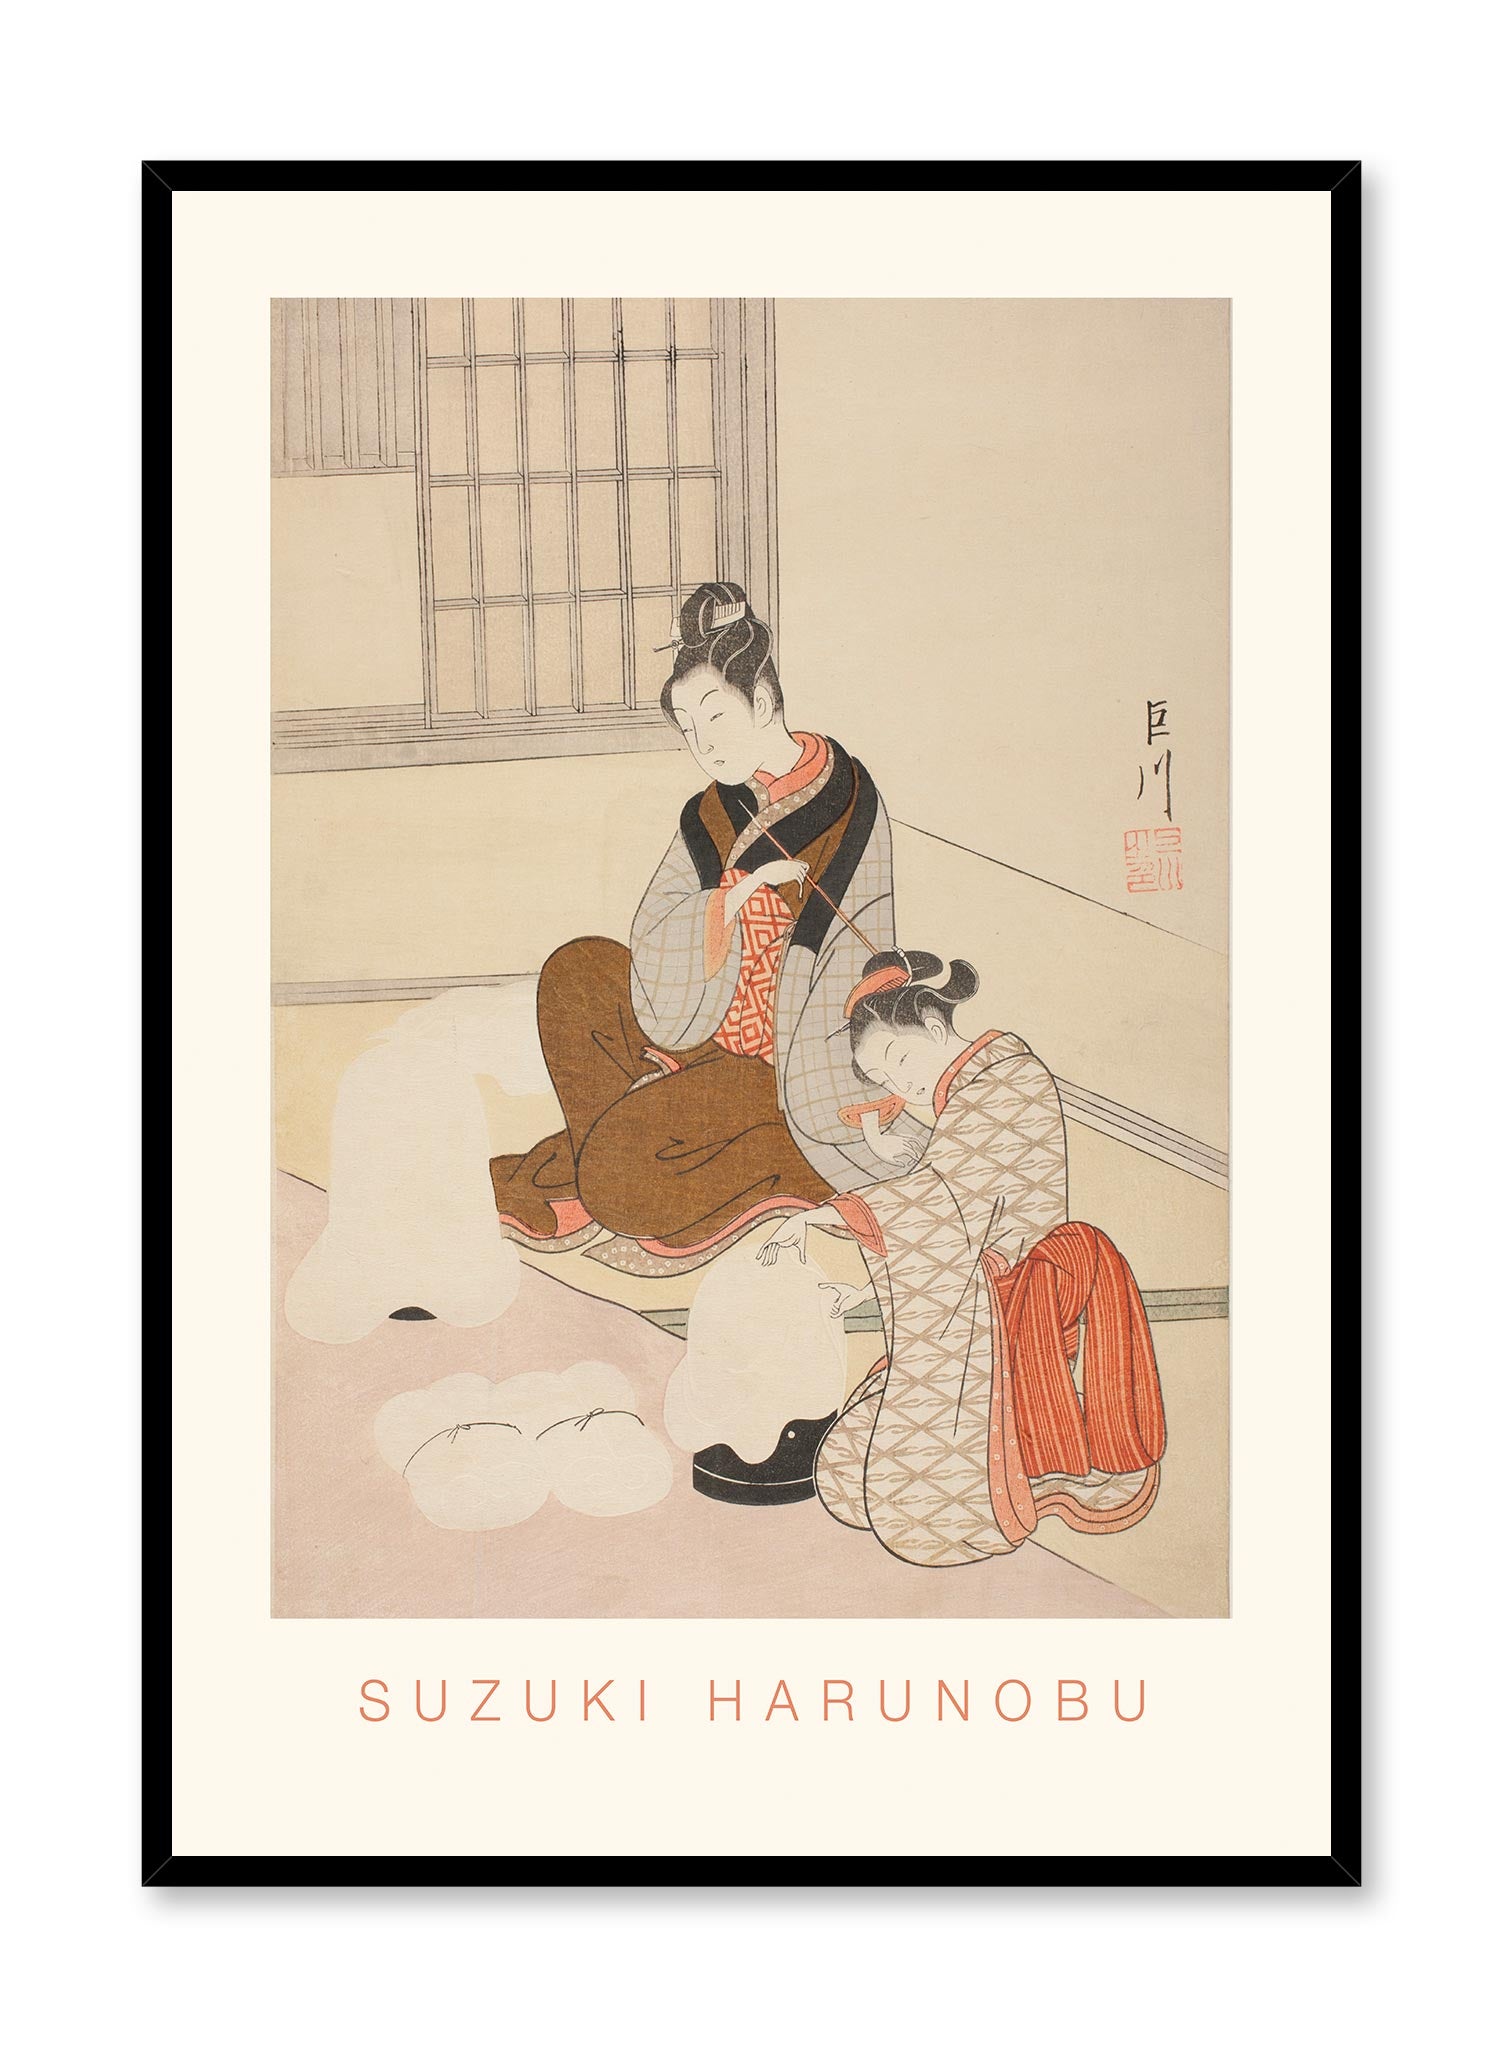 Evening snow on a Floss Shaper is a minimalist gravure by Opposite Wall of Suzuki Harunobu's Evening Snow on a Floss Shaper from the series "Eight Views of the Parlor". 